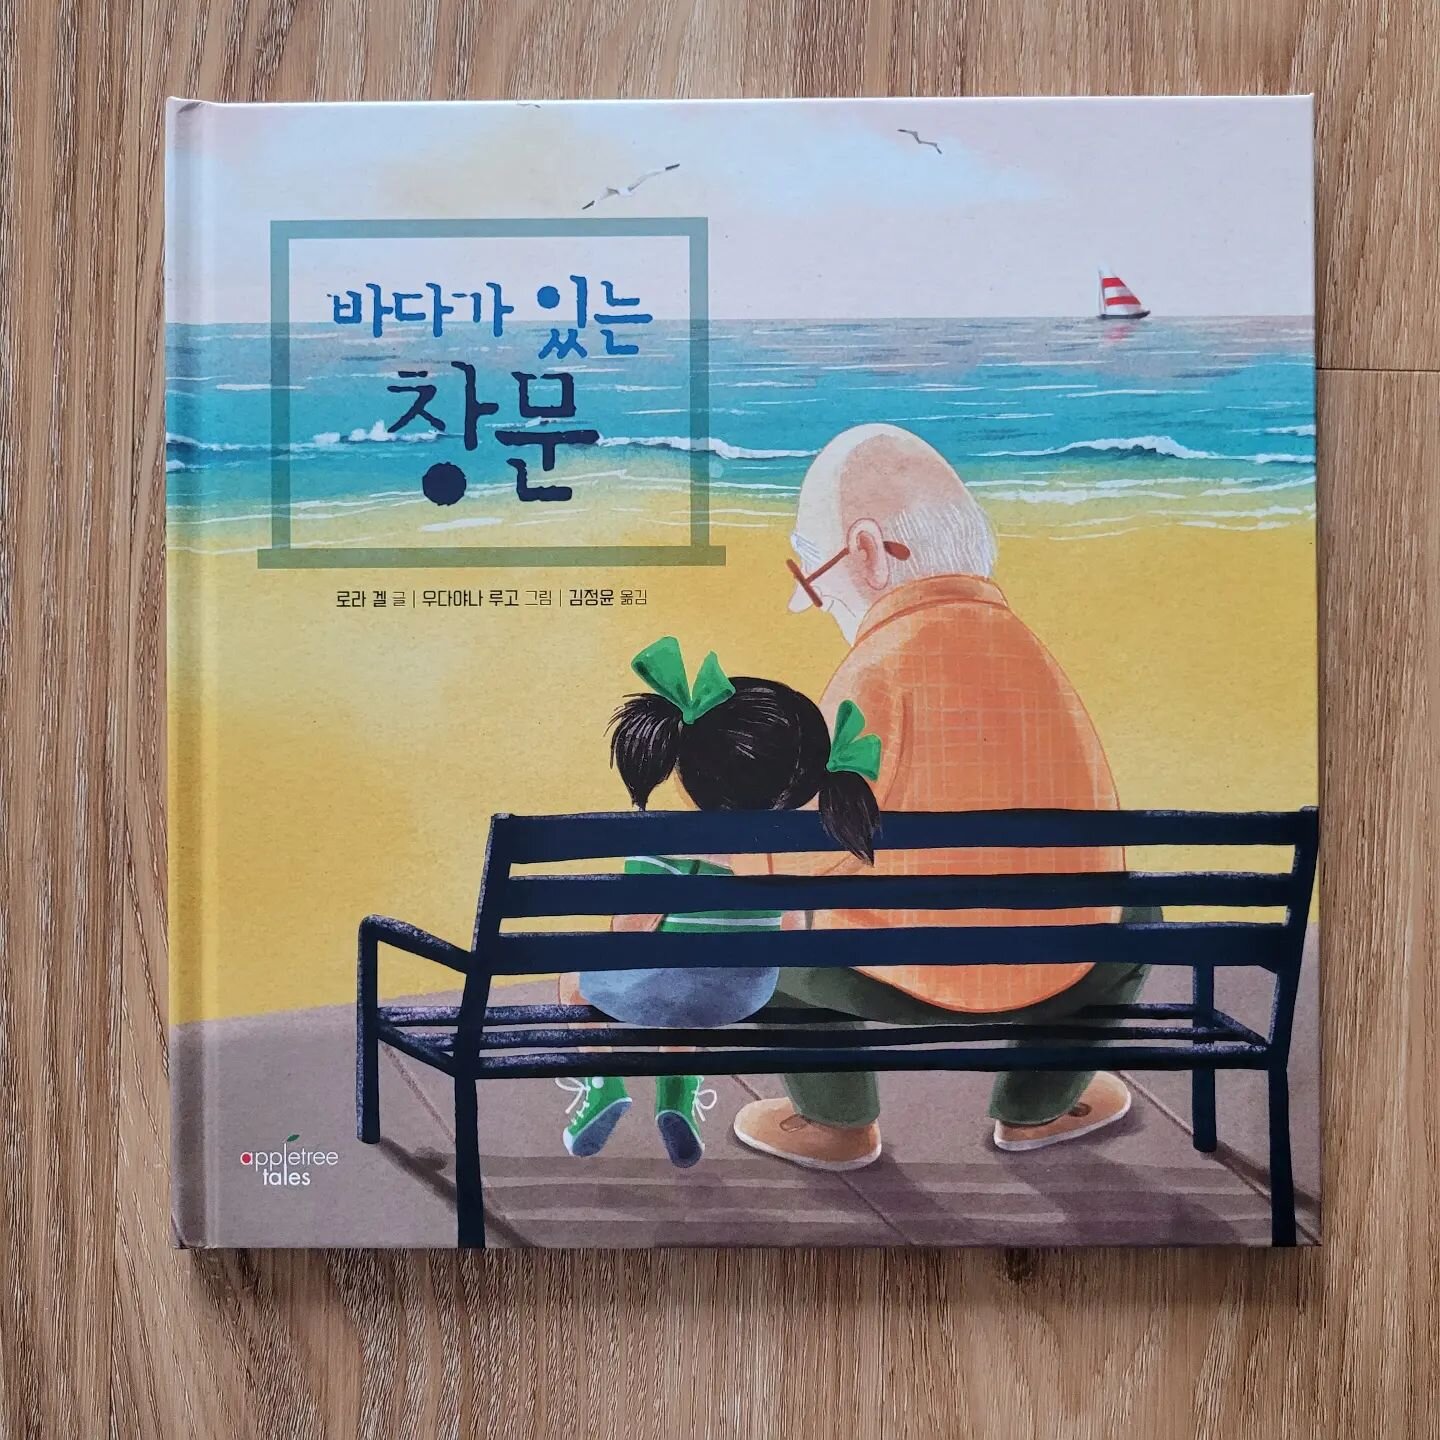 And in line (but unintended) with Asian Heritage Month, I got a surprise package!

This is the Korean version of The Window (Grandpa's Window). I love the use of an interior spread for the cover.

Thank you  @bonnierbooks_uk !
The Window was written 